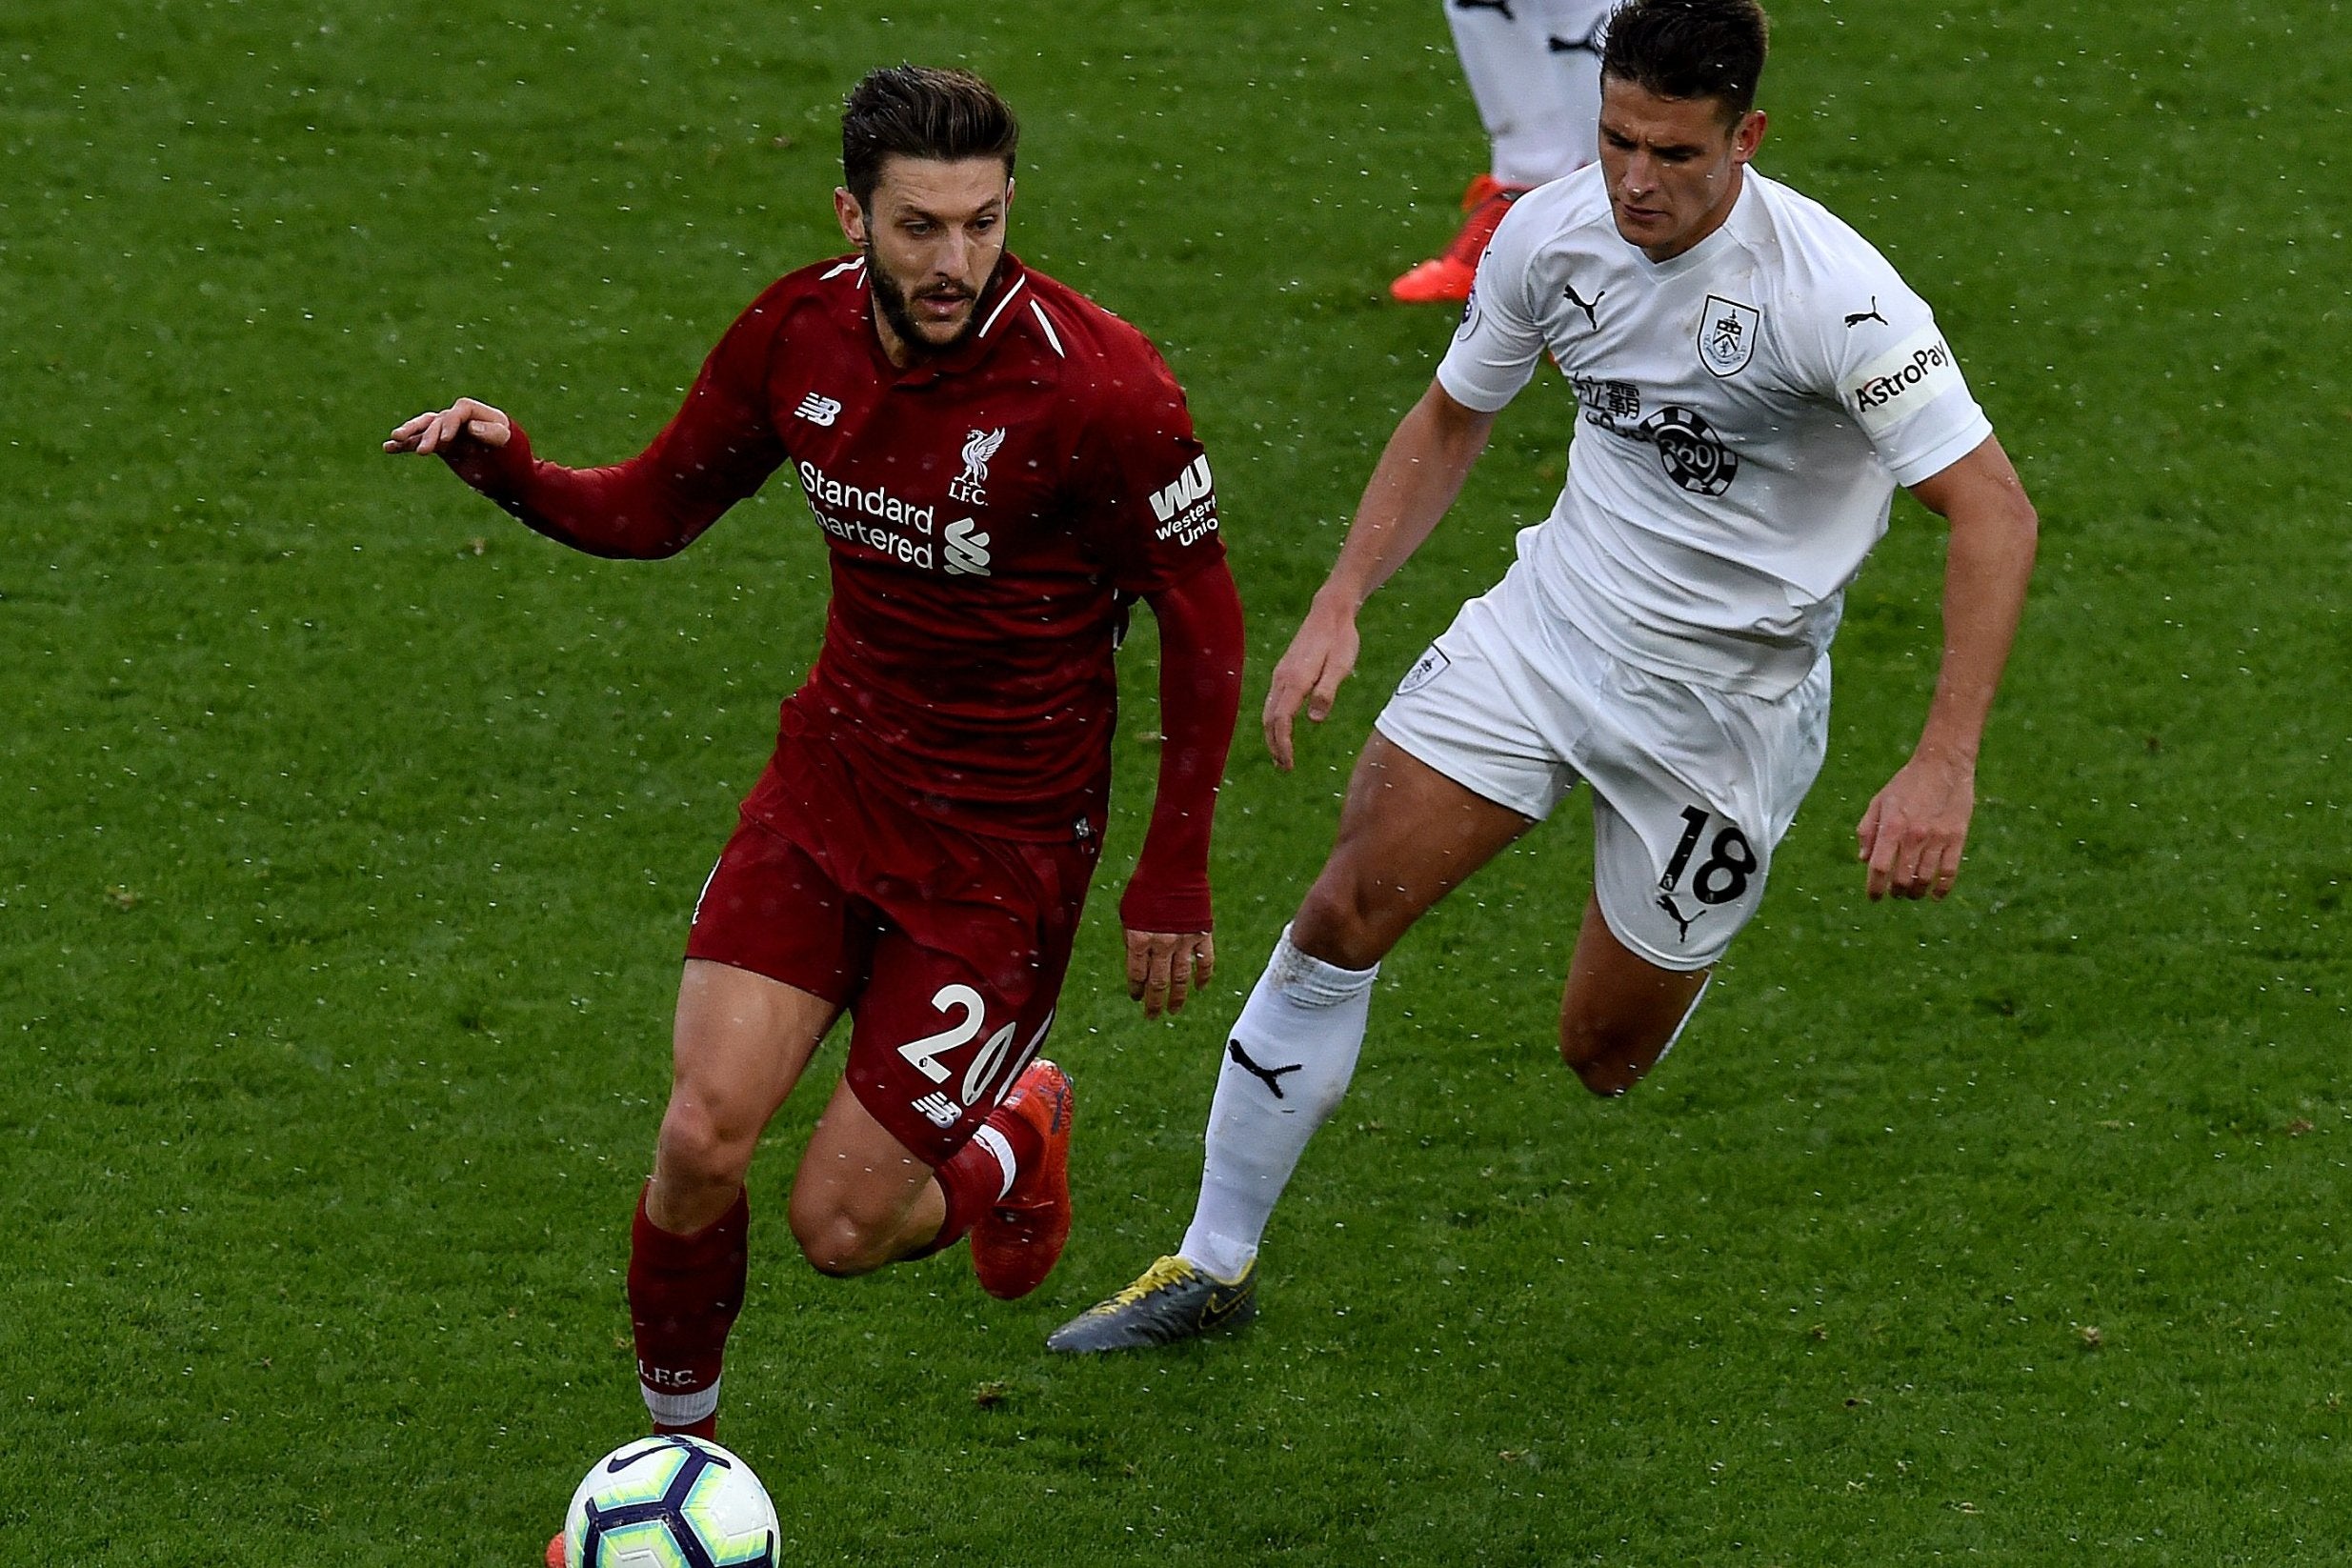 Adam Lallana gave Liverpool a different way to attack